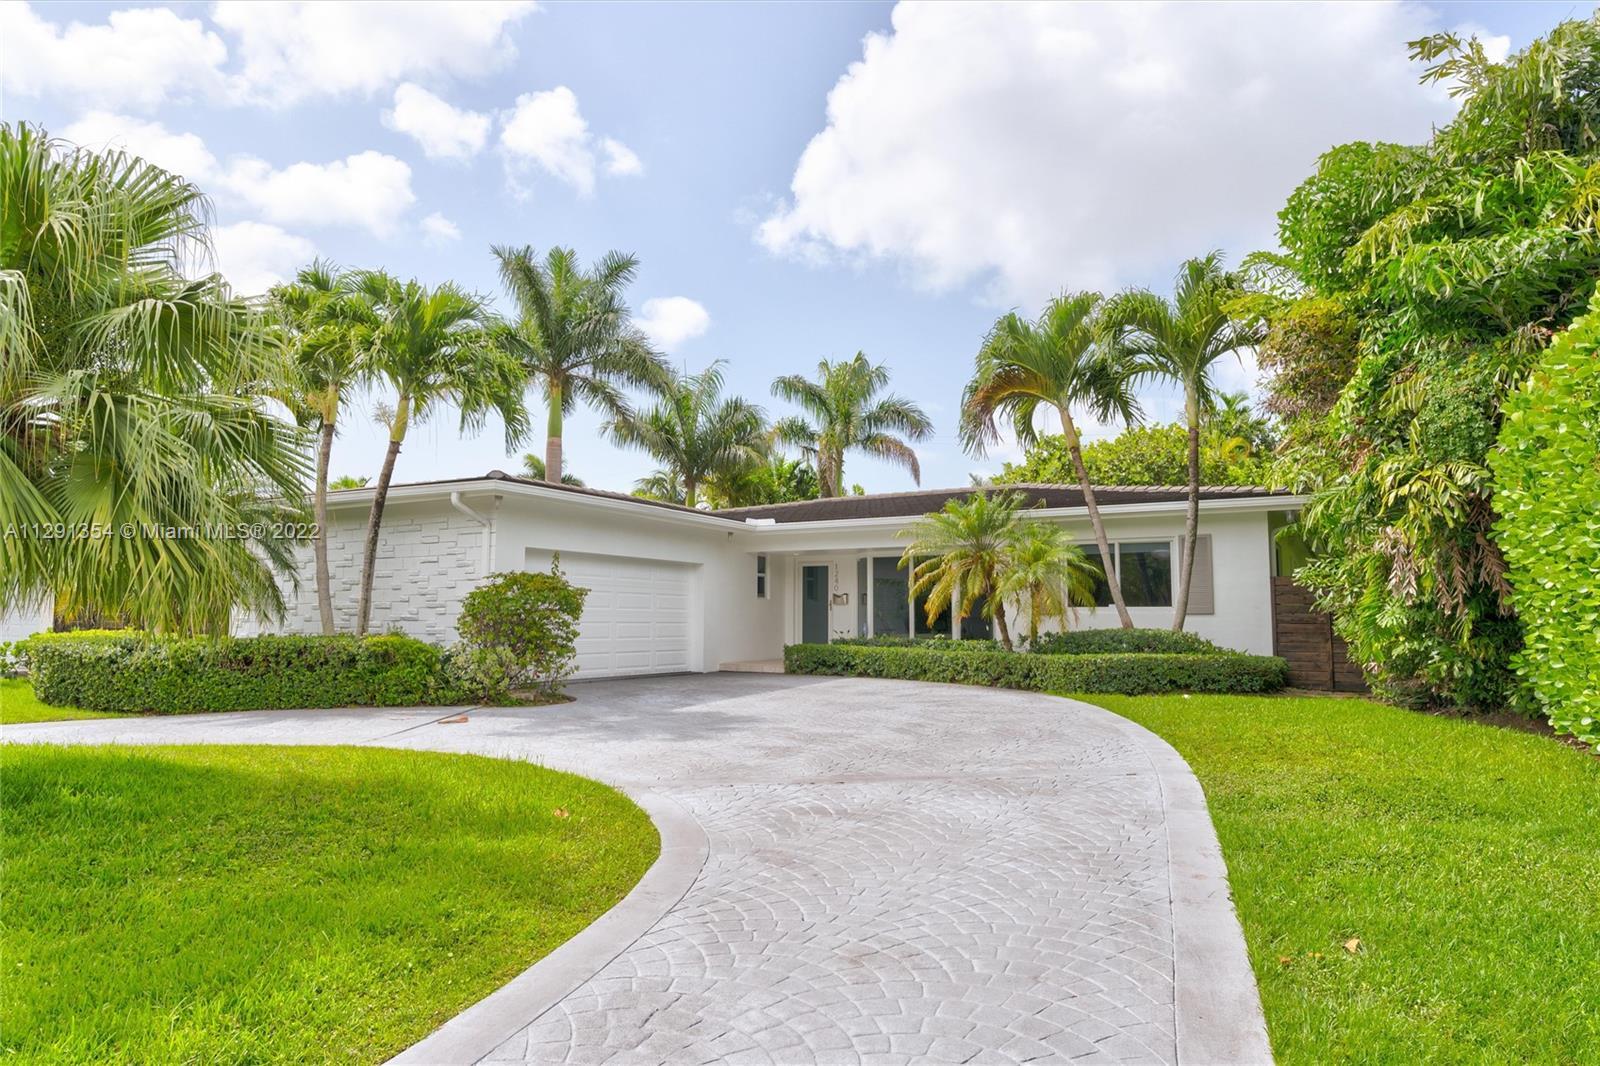 Beautiful ranch style home located in the highly desirable East side neighborhood of Miami Shores, s